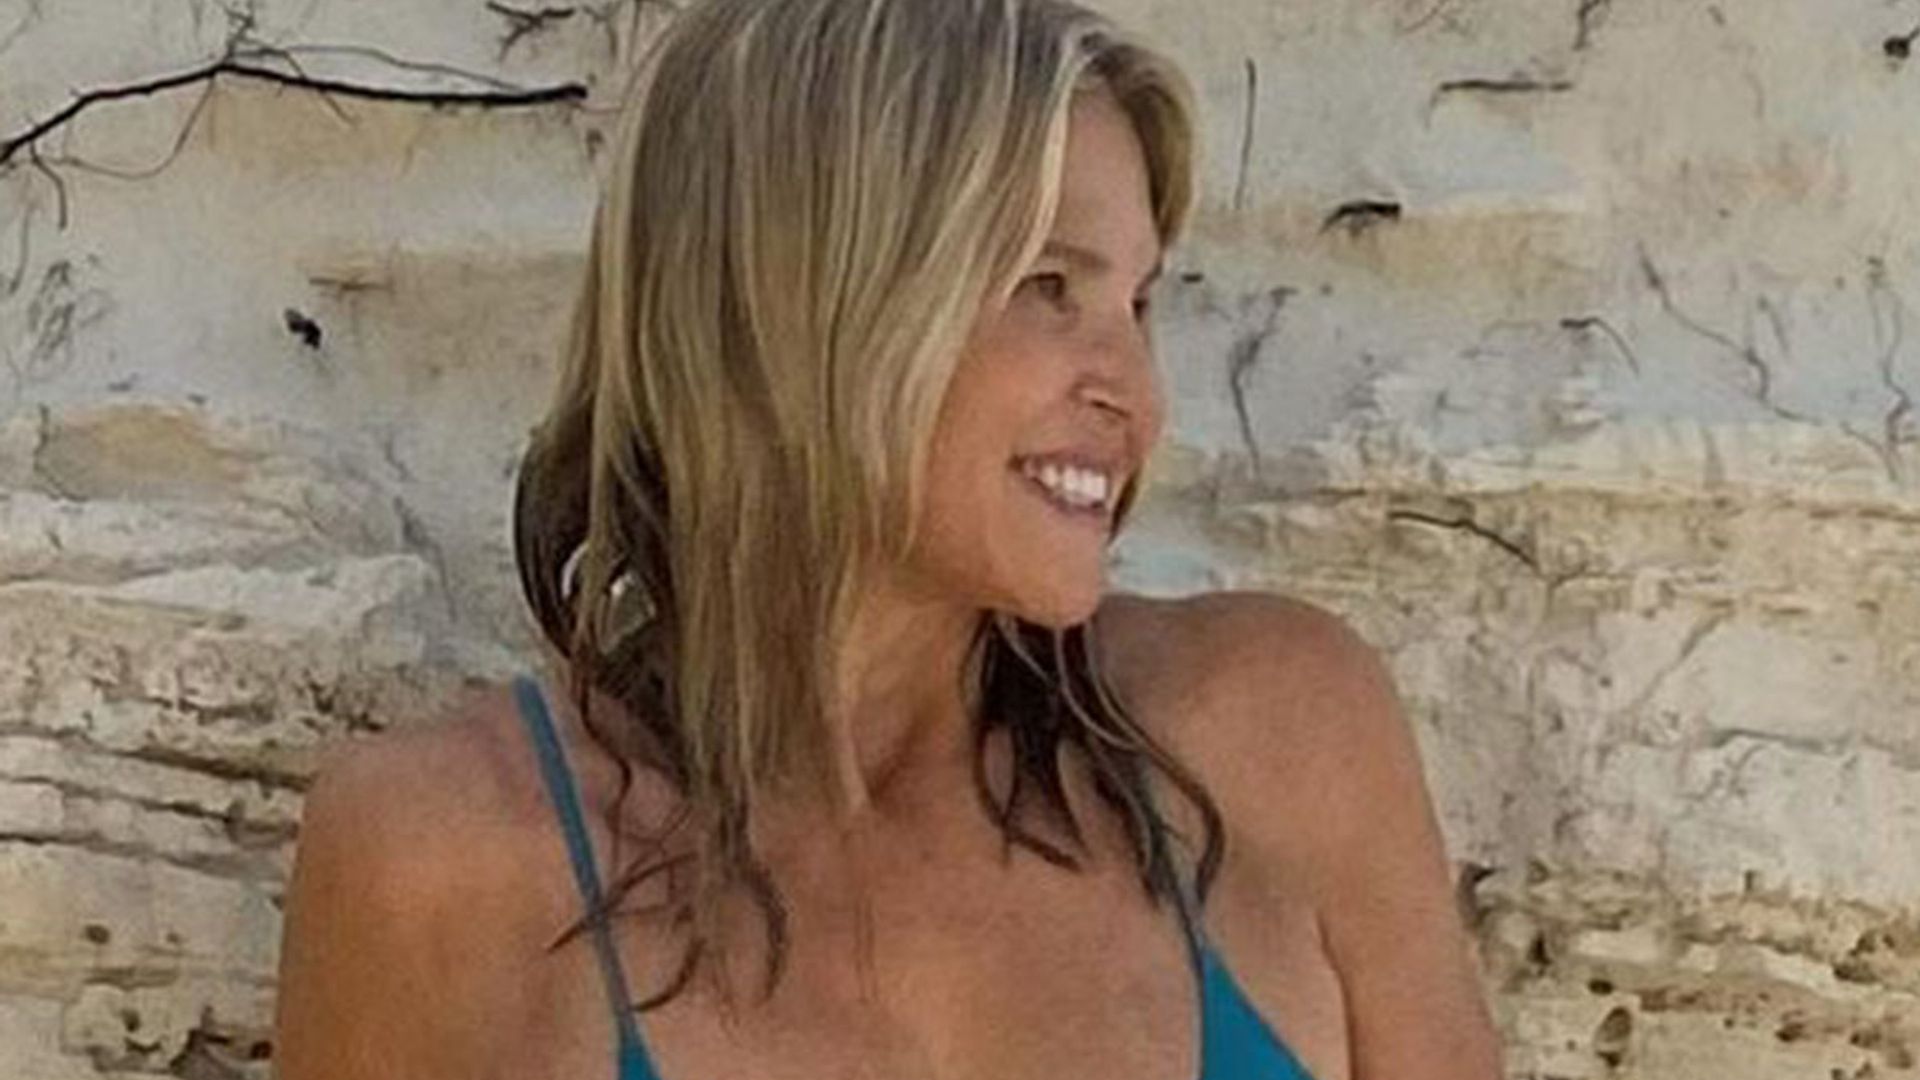 Christie Brinkleys Age Defying Physique In Tiny Bikini Leaves Fans 